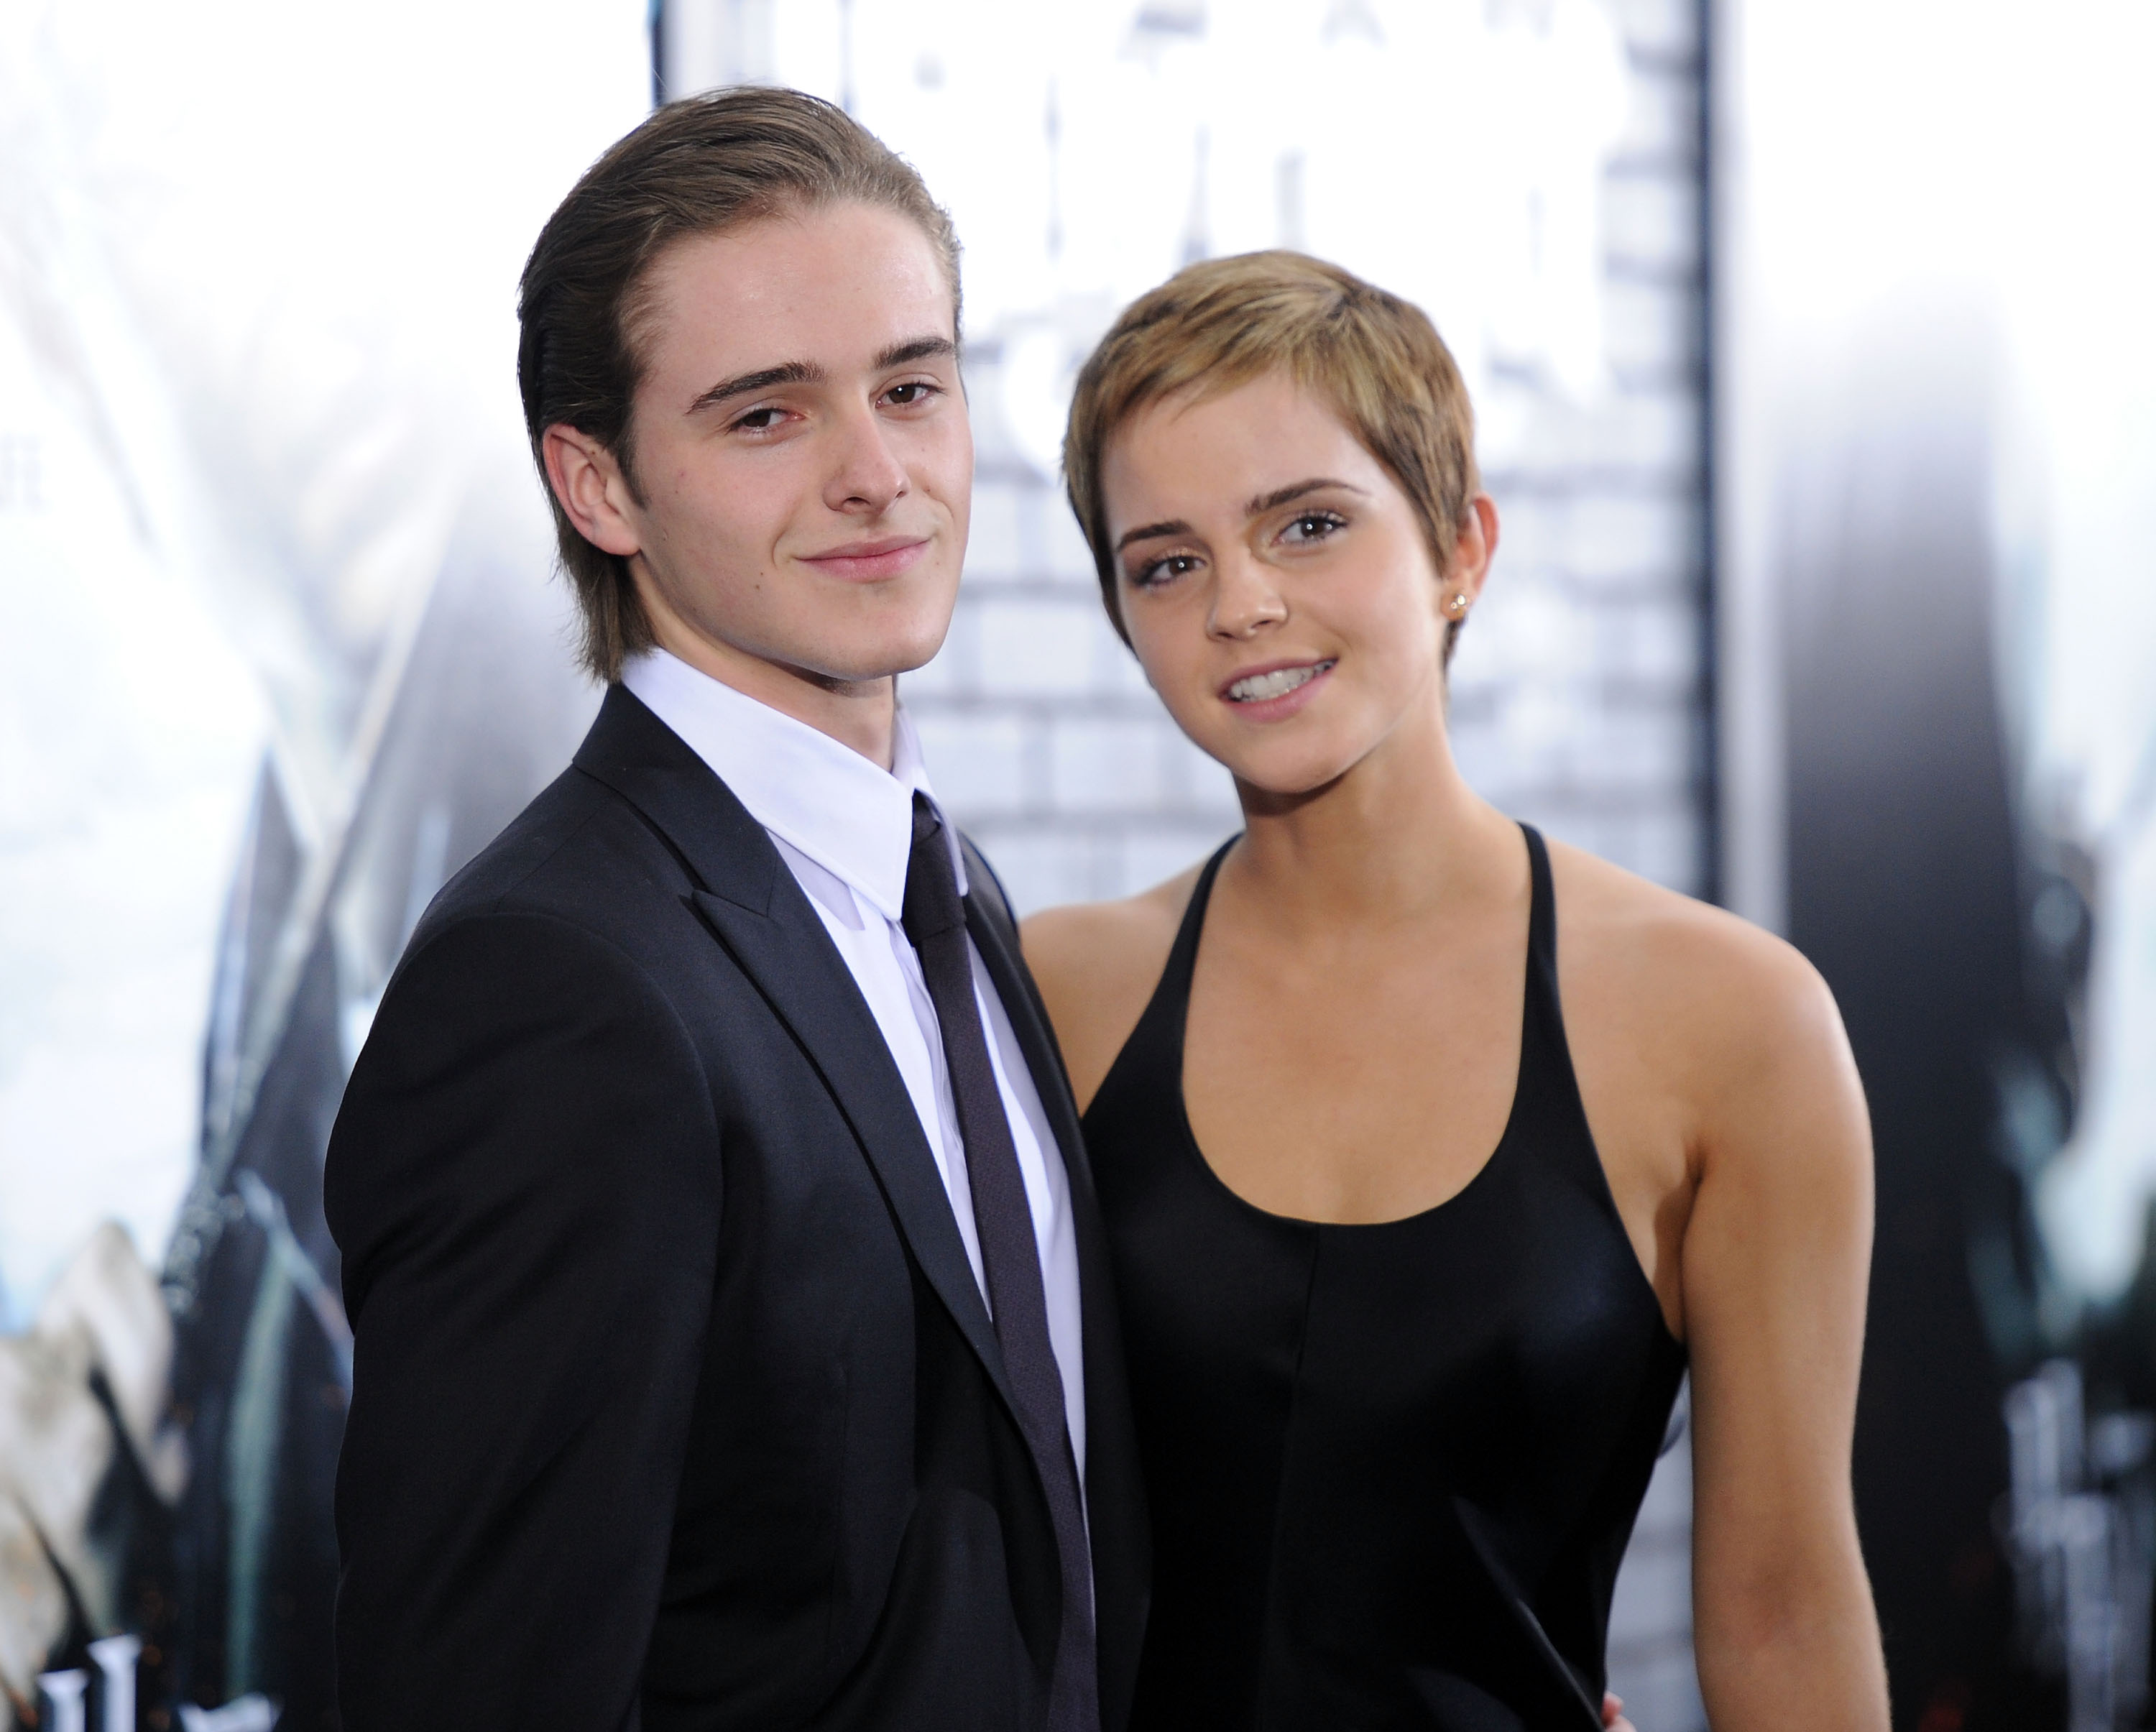 19 Celebrities You Didn't Know Have Attractive Siblings